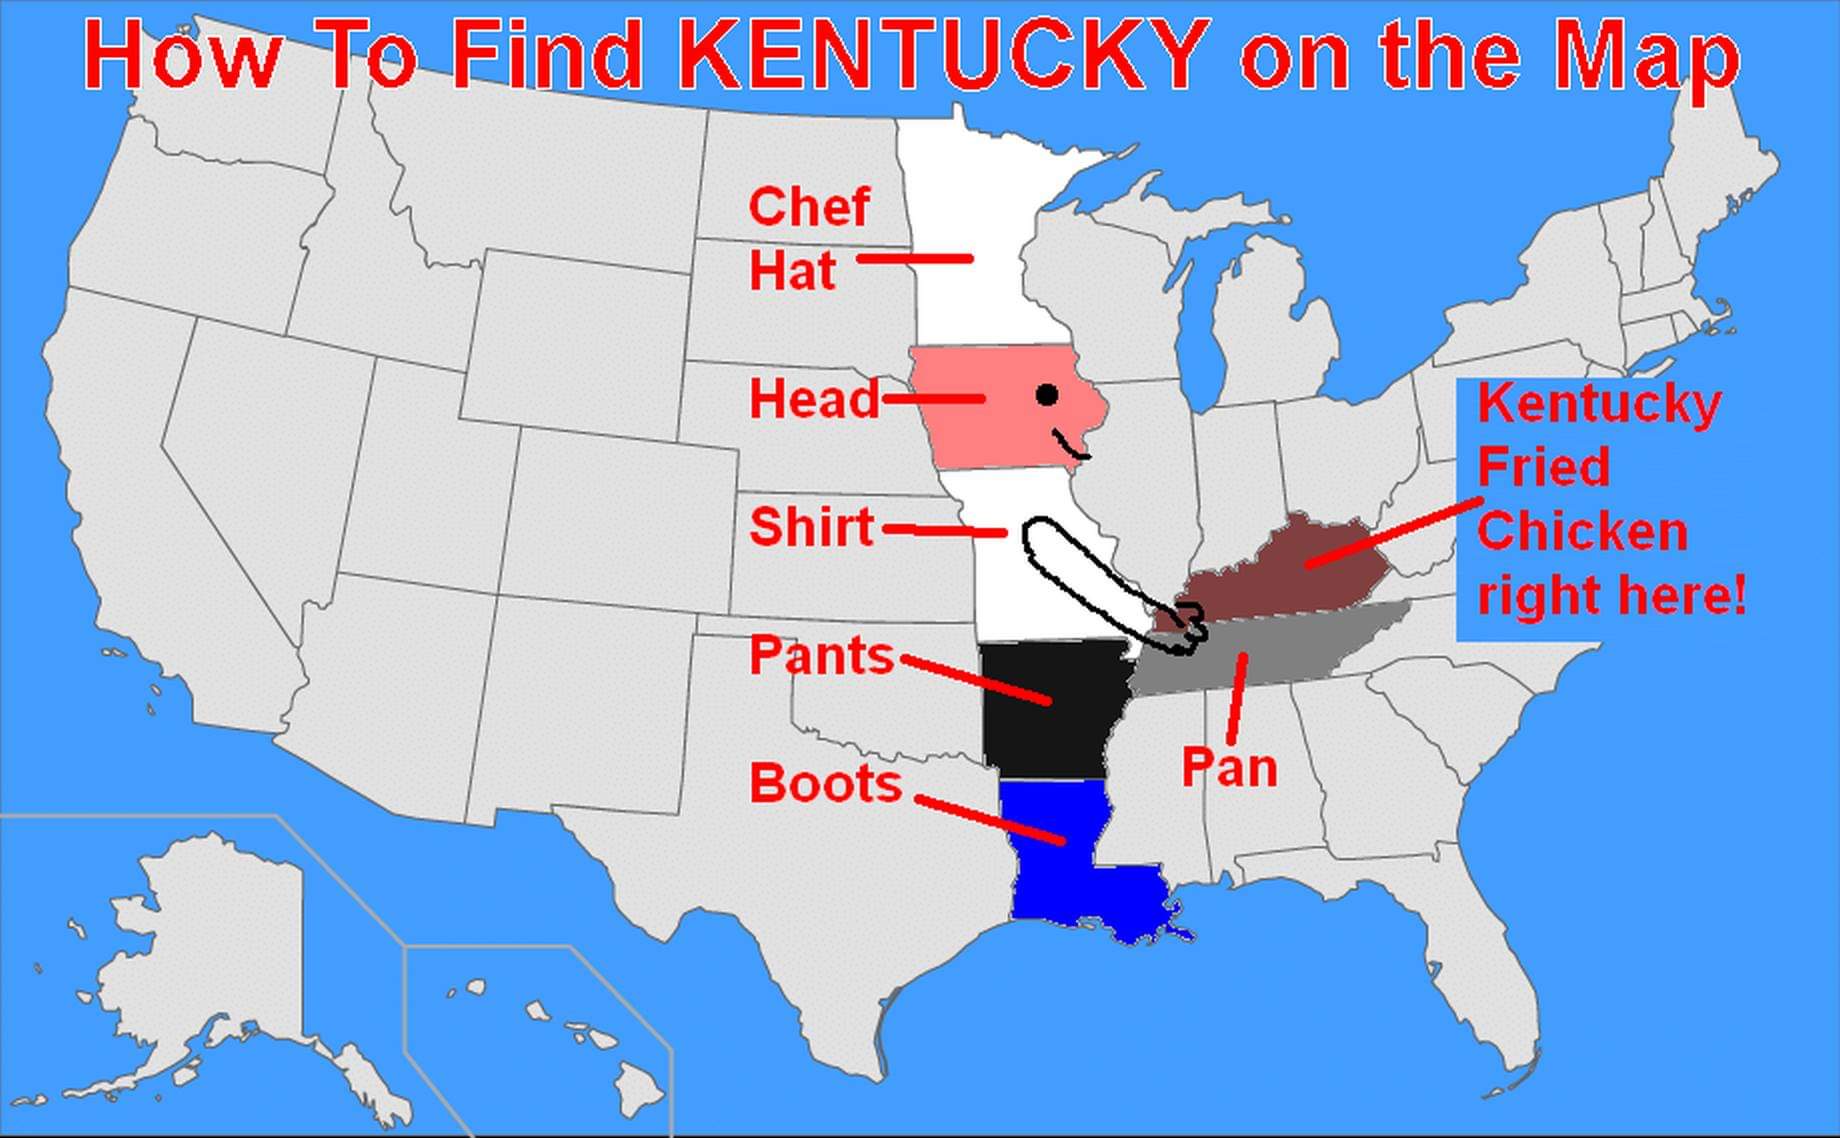 funny meme of find kentucky on a map - How To Find Kentucky on the Map Chef Hat Head Kentucky Fried Chicken right here! Shirt Pants Pan Boots